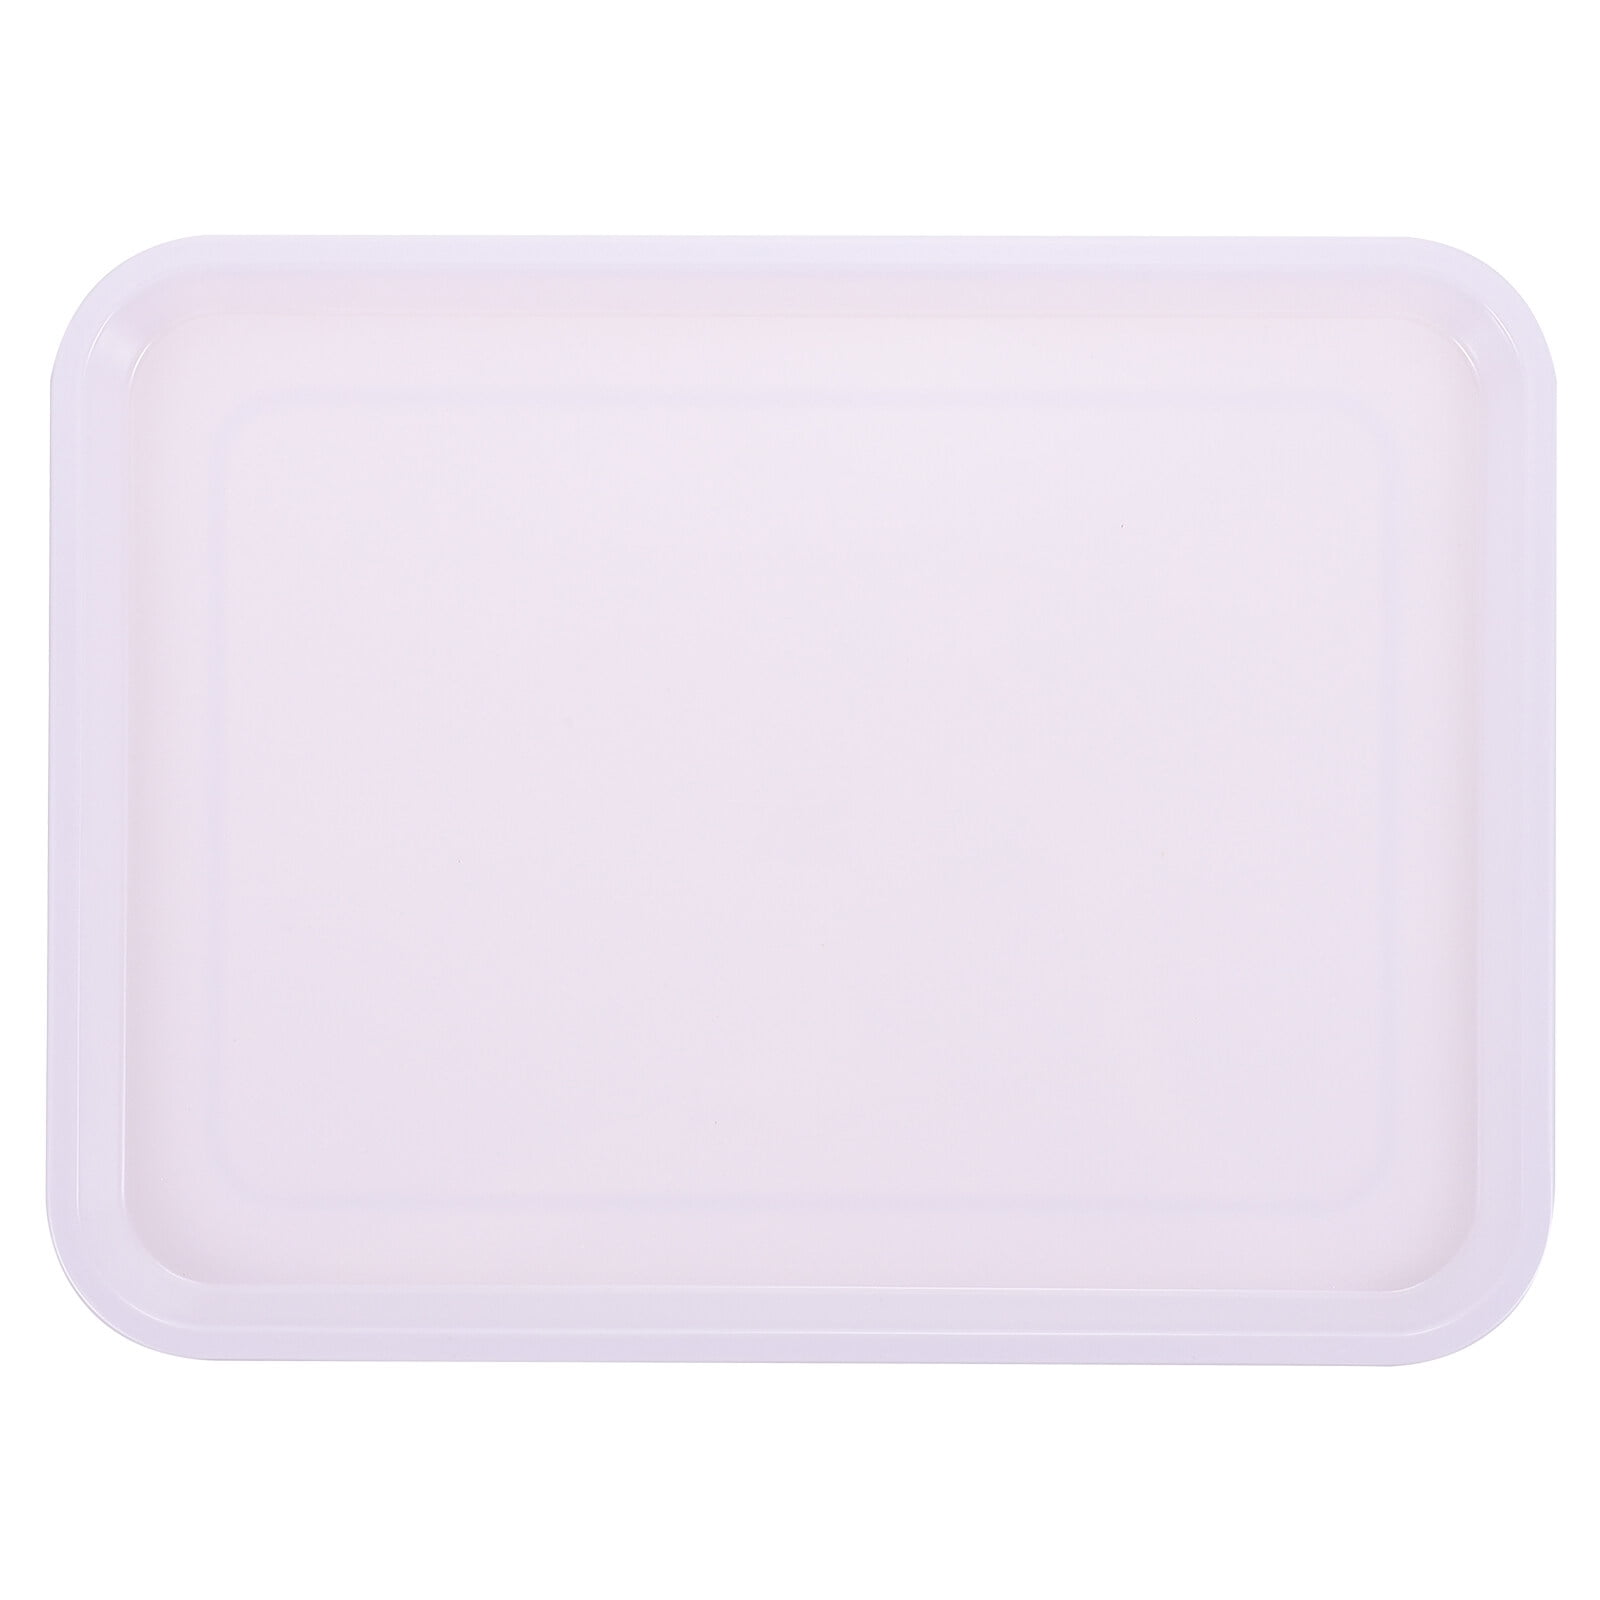 6 Large Rectangle Crystal Clear Heavy Duty Disposable Serving Tray. 18.25 x  11.25 clear plastic serving platters. 